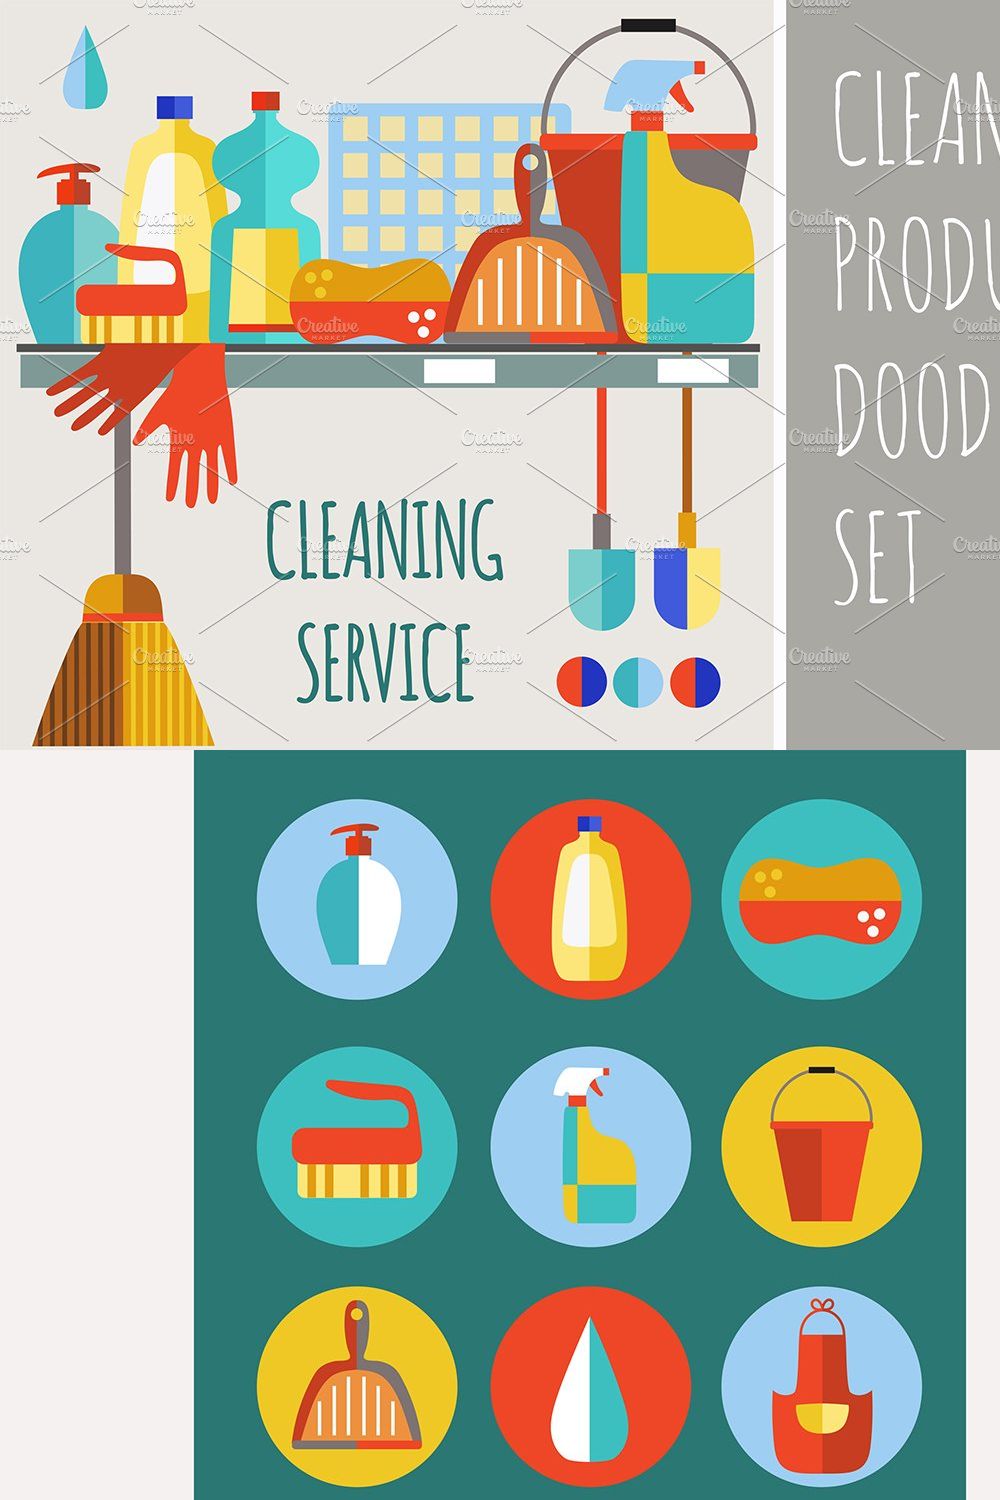 Cleaning product icon set pinterest preview image.